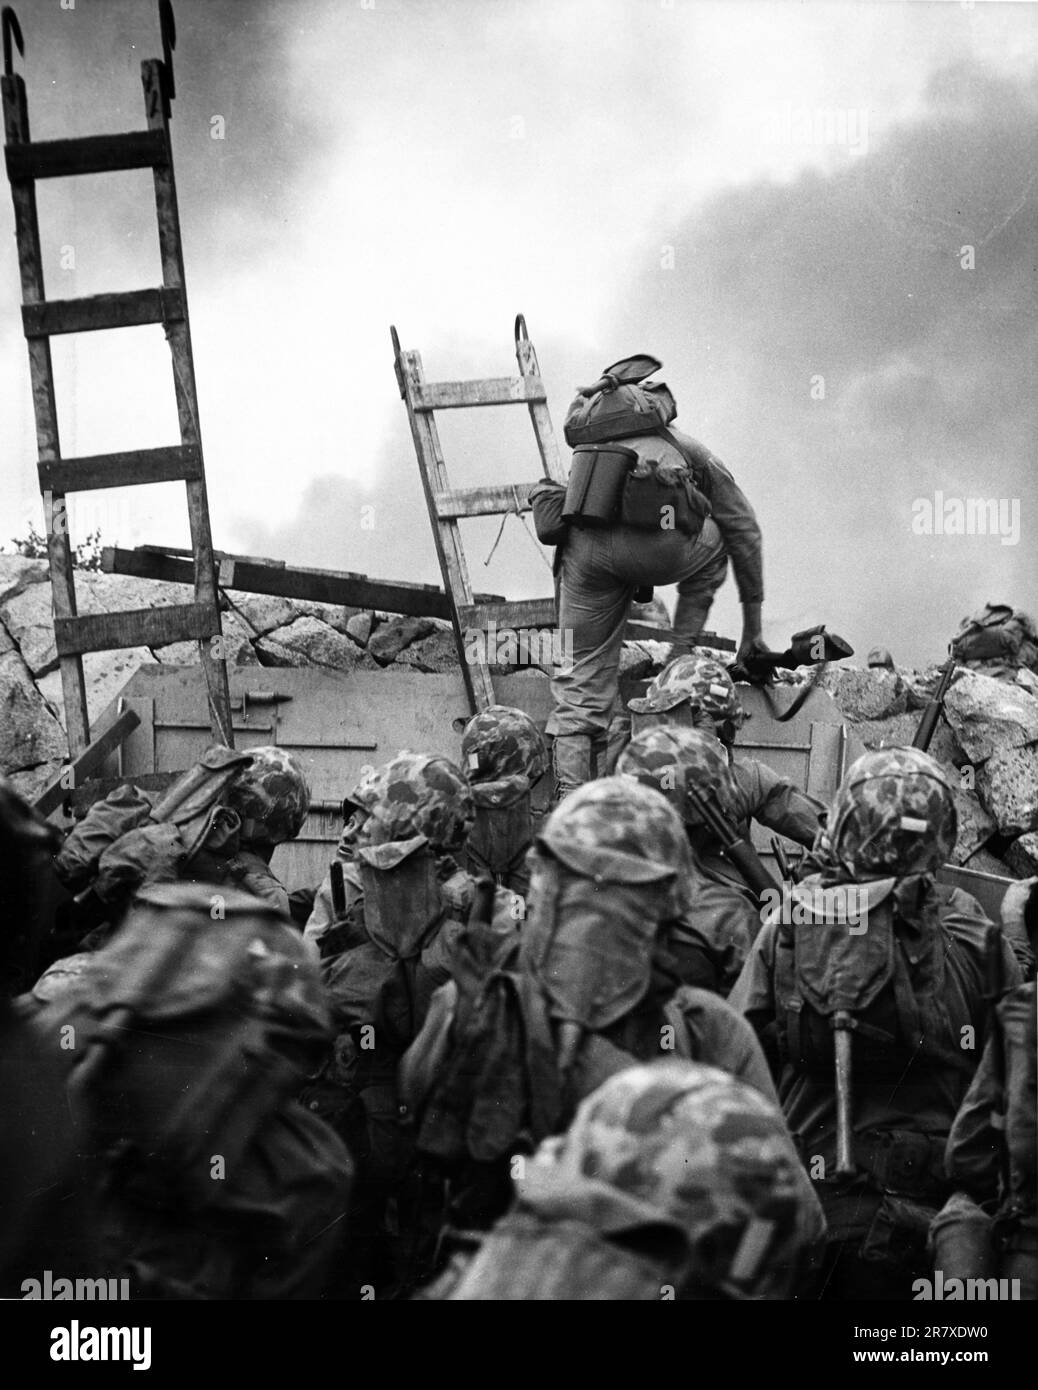 First Lieutenant Baldomero Lopez, USMC, leads the 3rd Platoon, Company A, 1st Battalion, 5th Marines over the seawall on the northern side of Red Beach, as the second assault wave lands, 15 September 1950, during the Inchon invasion. Wooden scaling ladders are in use to facilitate disembarkation from the LCVP that brought these men to the shore. Lt. Lopez was killed in action within a few minutes Stock Photo